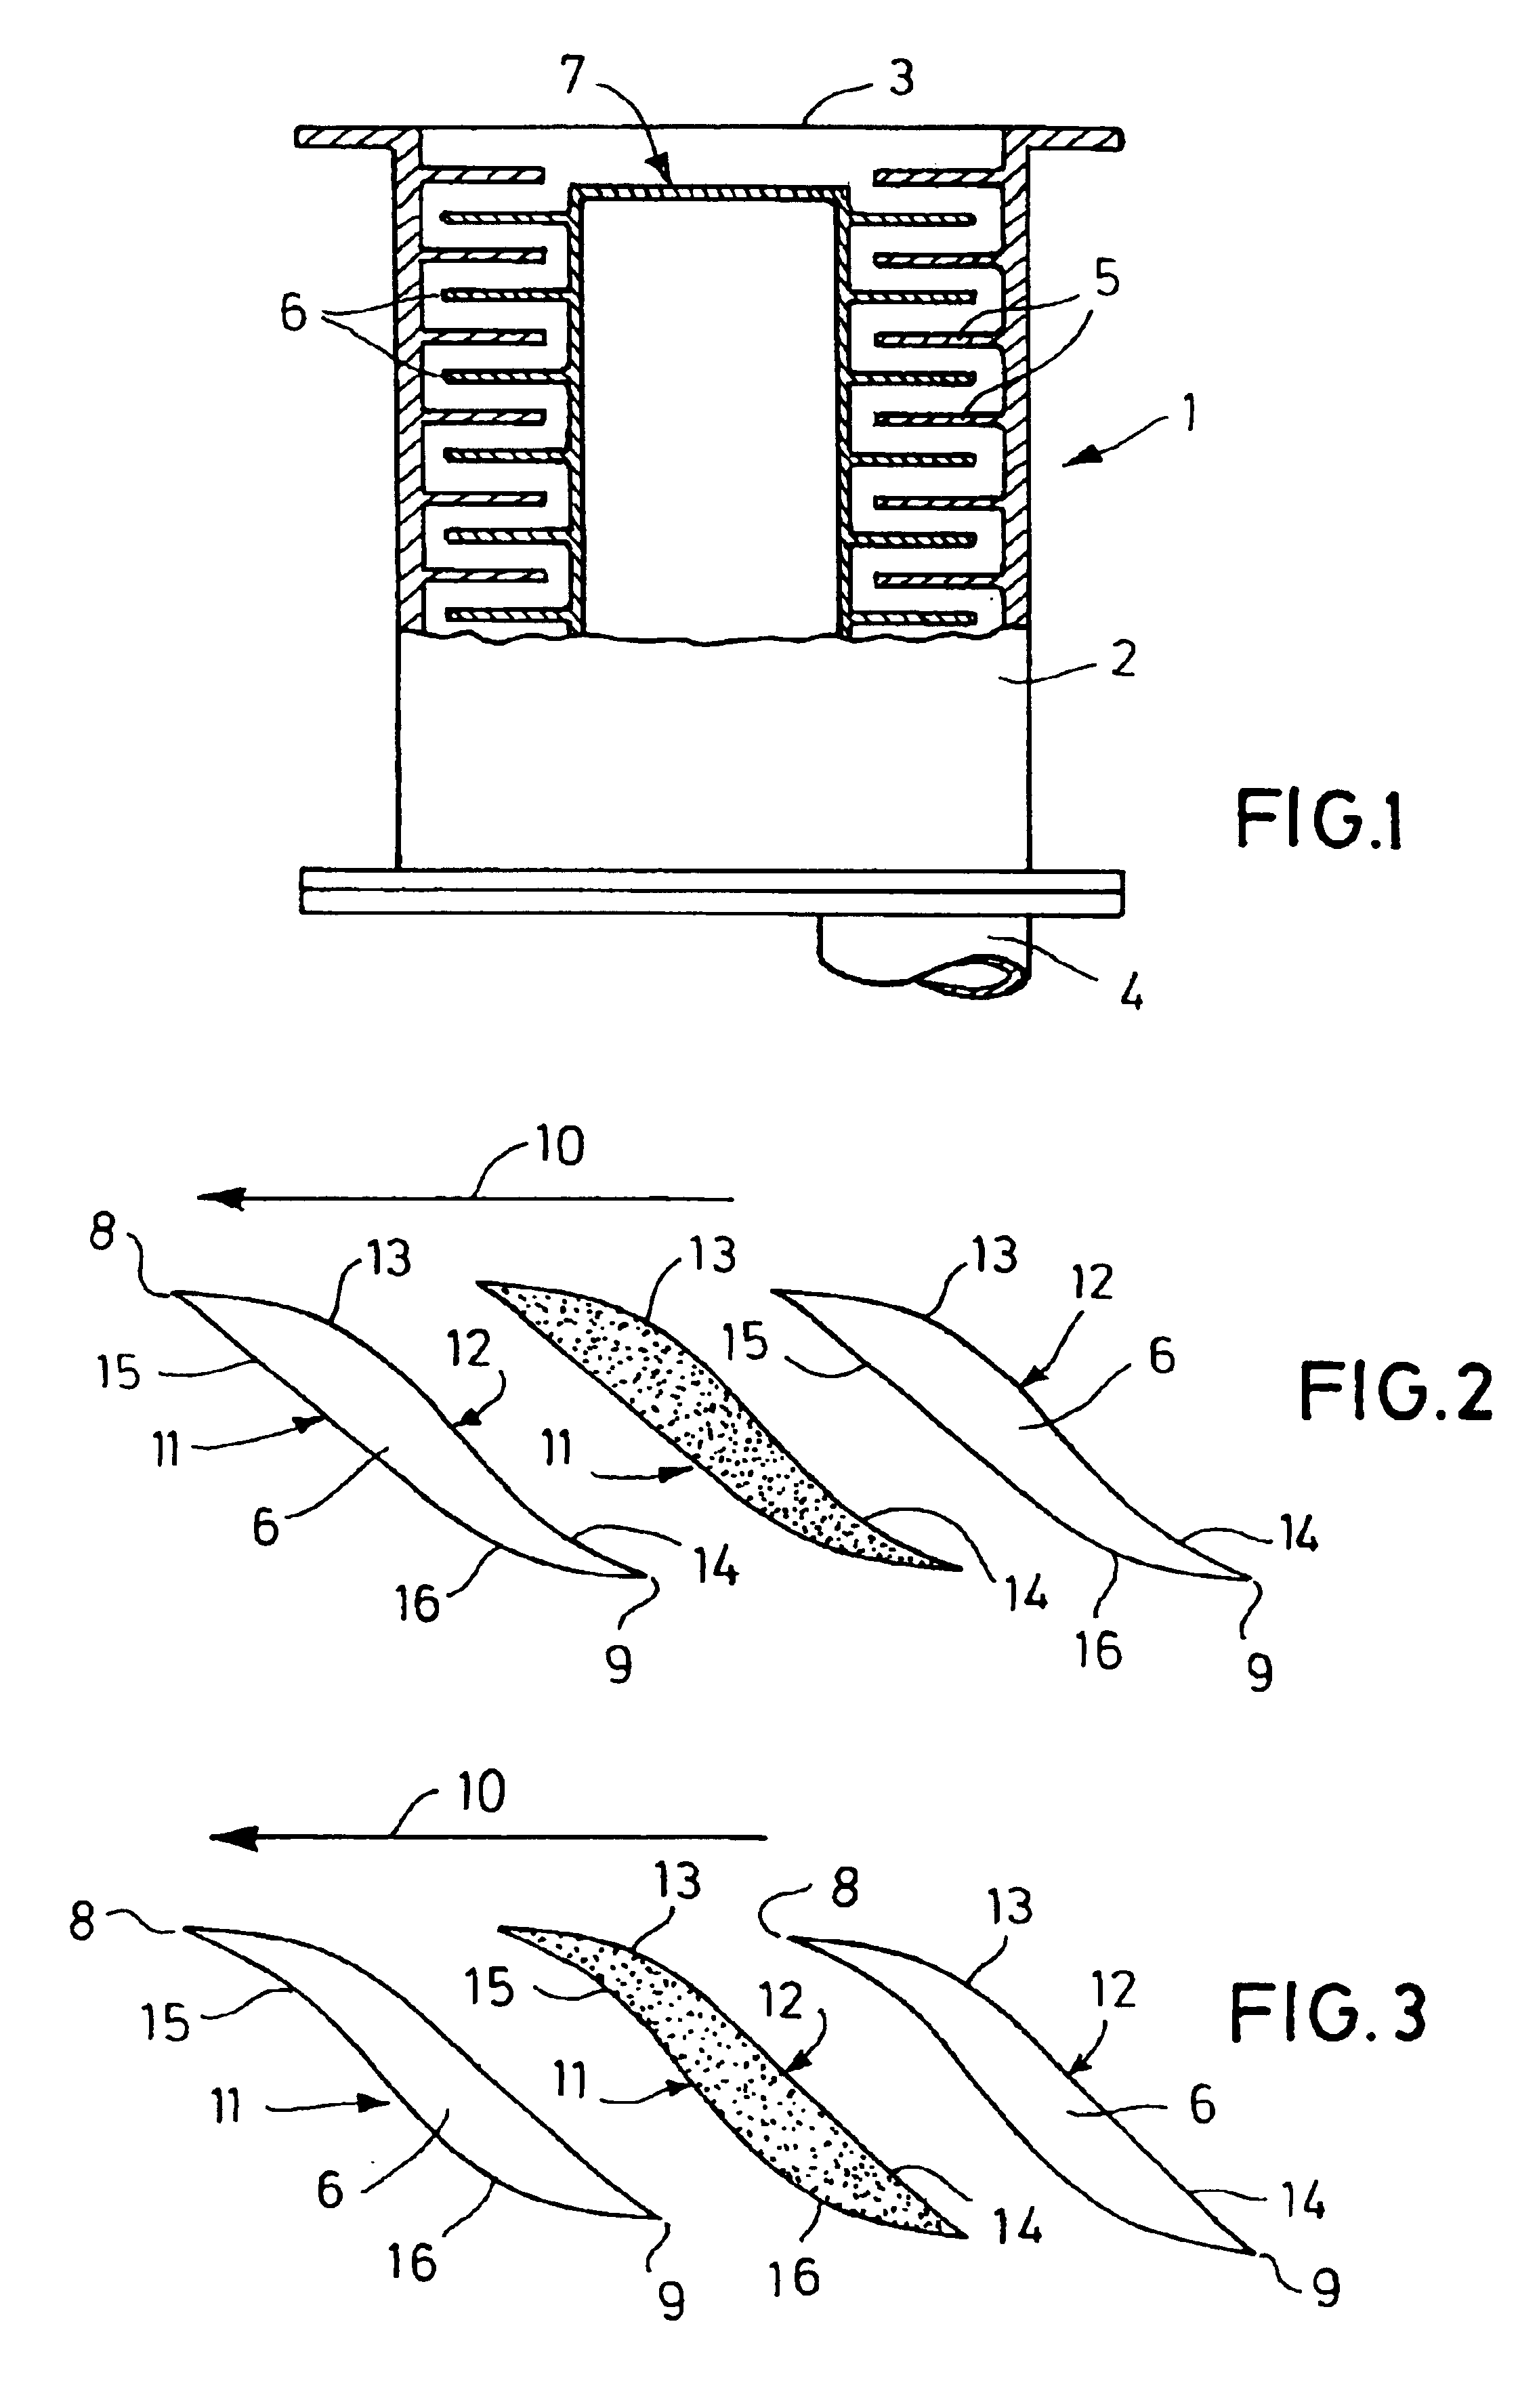 Turbomolecular vacuum pump with the rotor and stator vanes